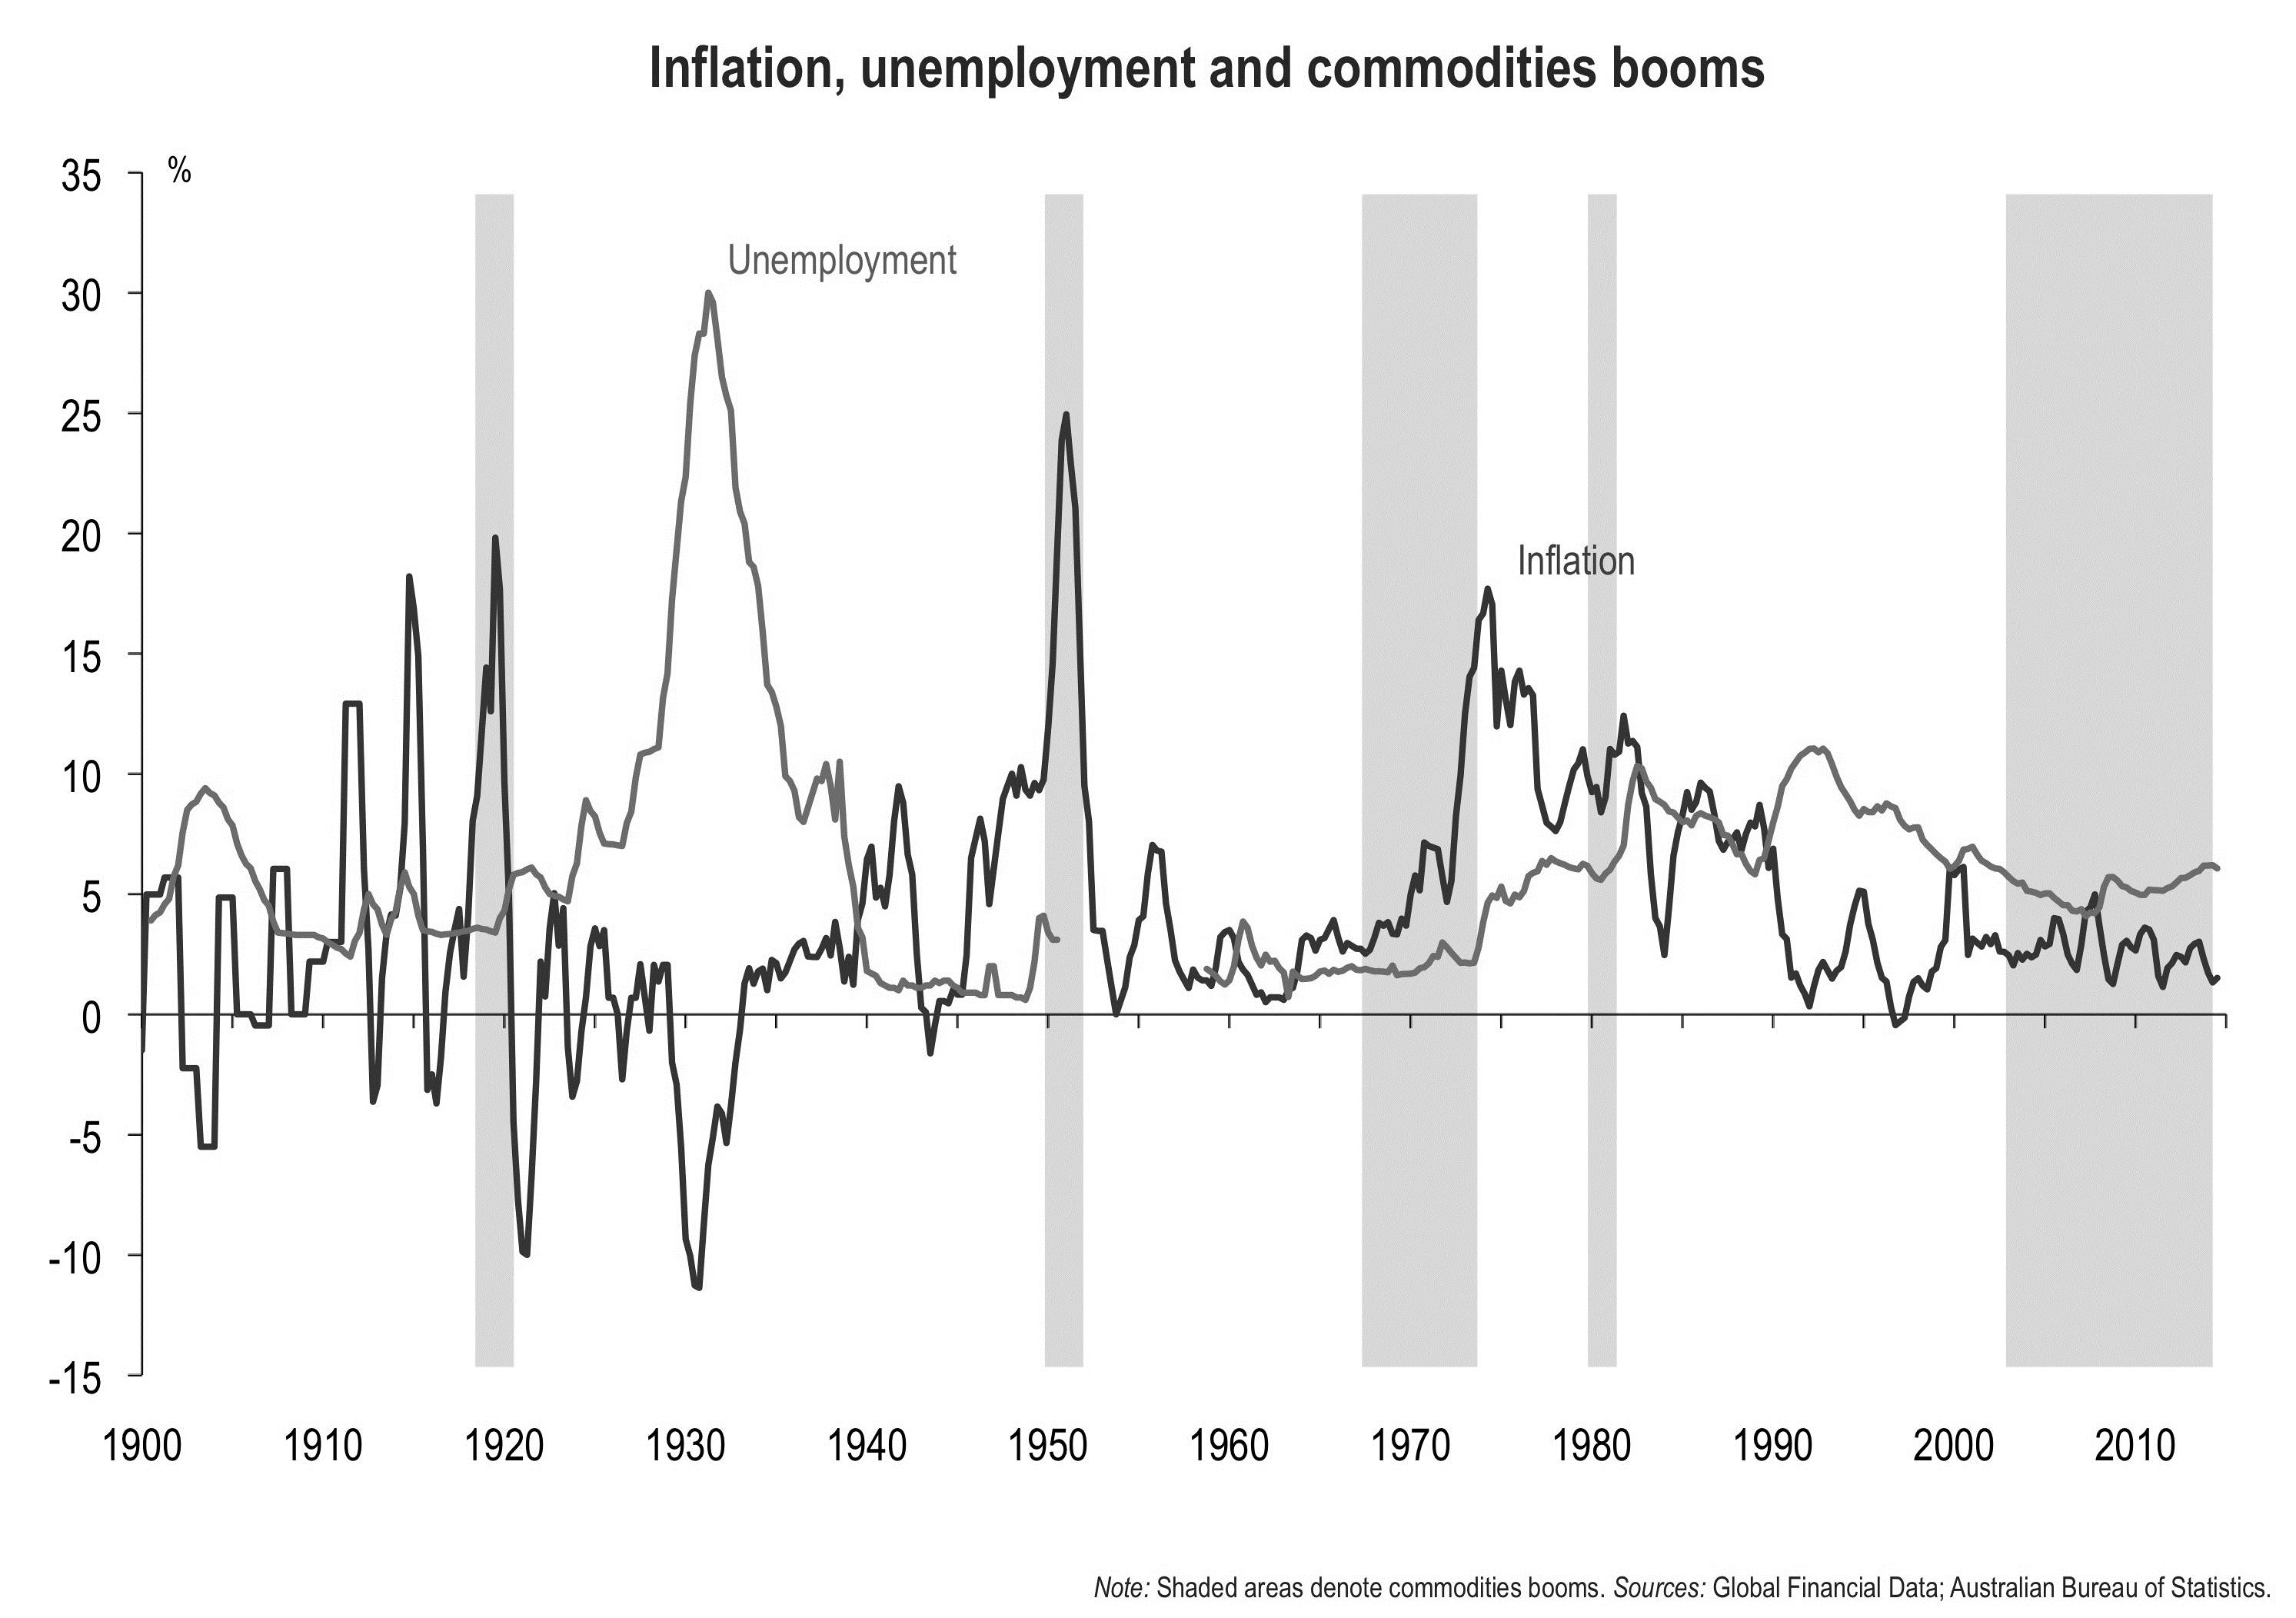 Figure 14: Correlation between commodities booms and inflation.